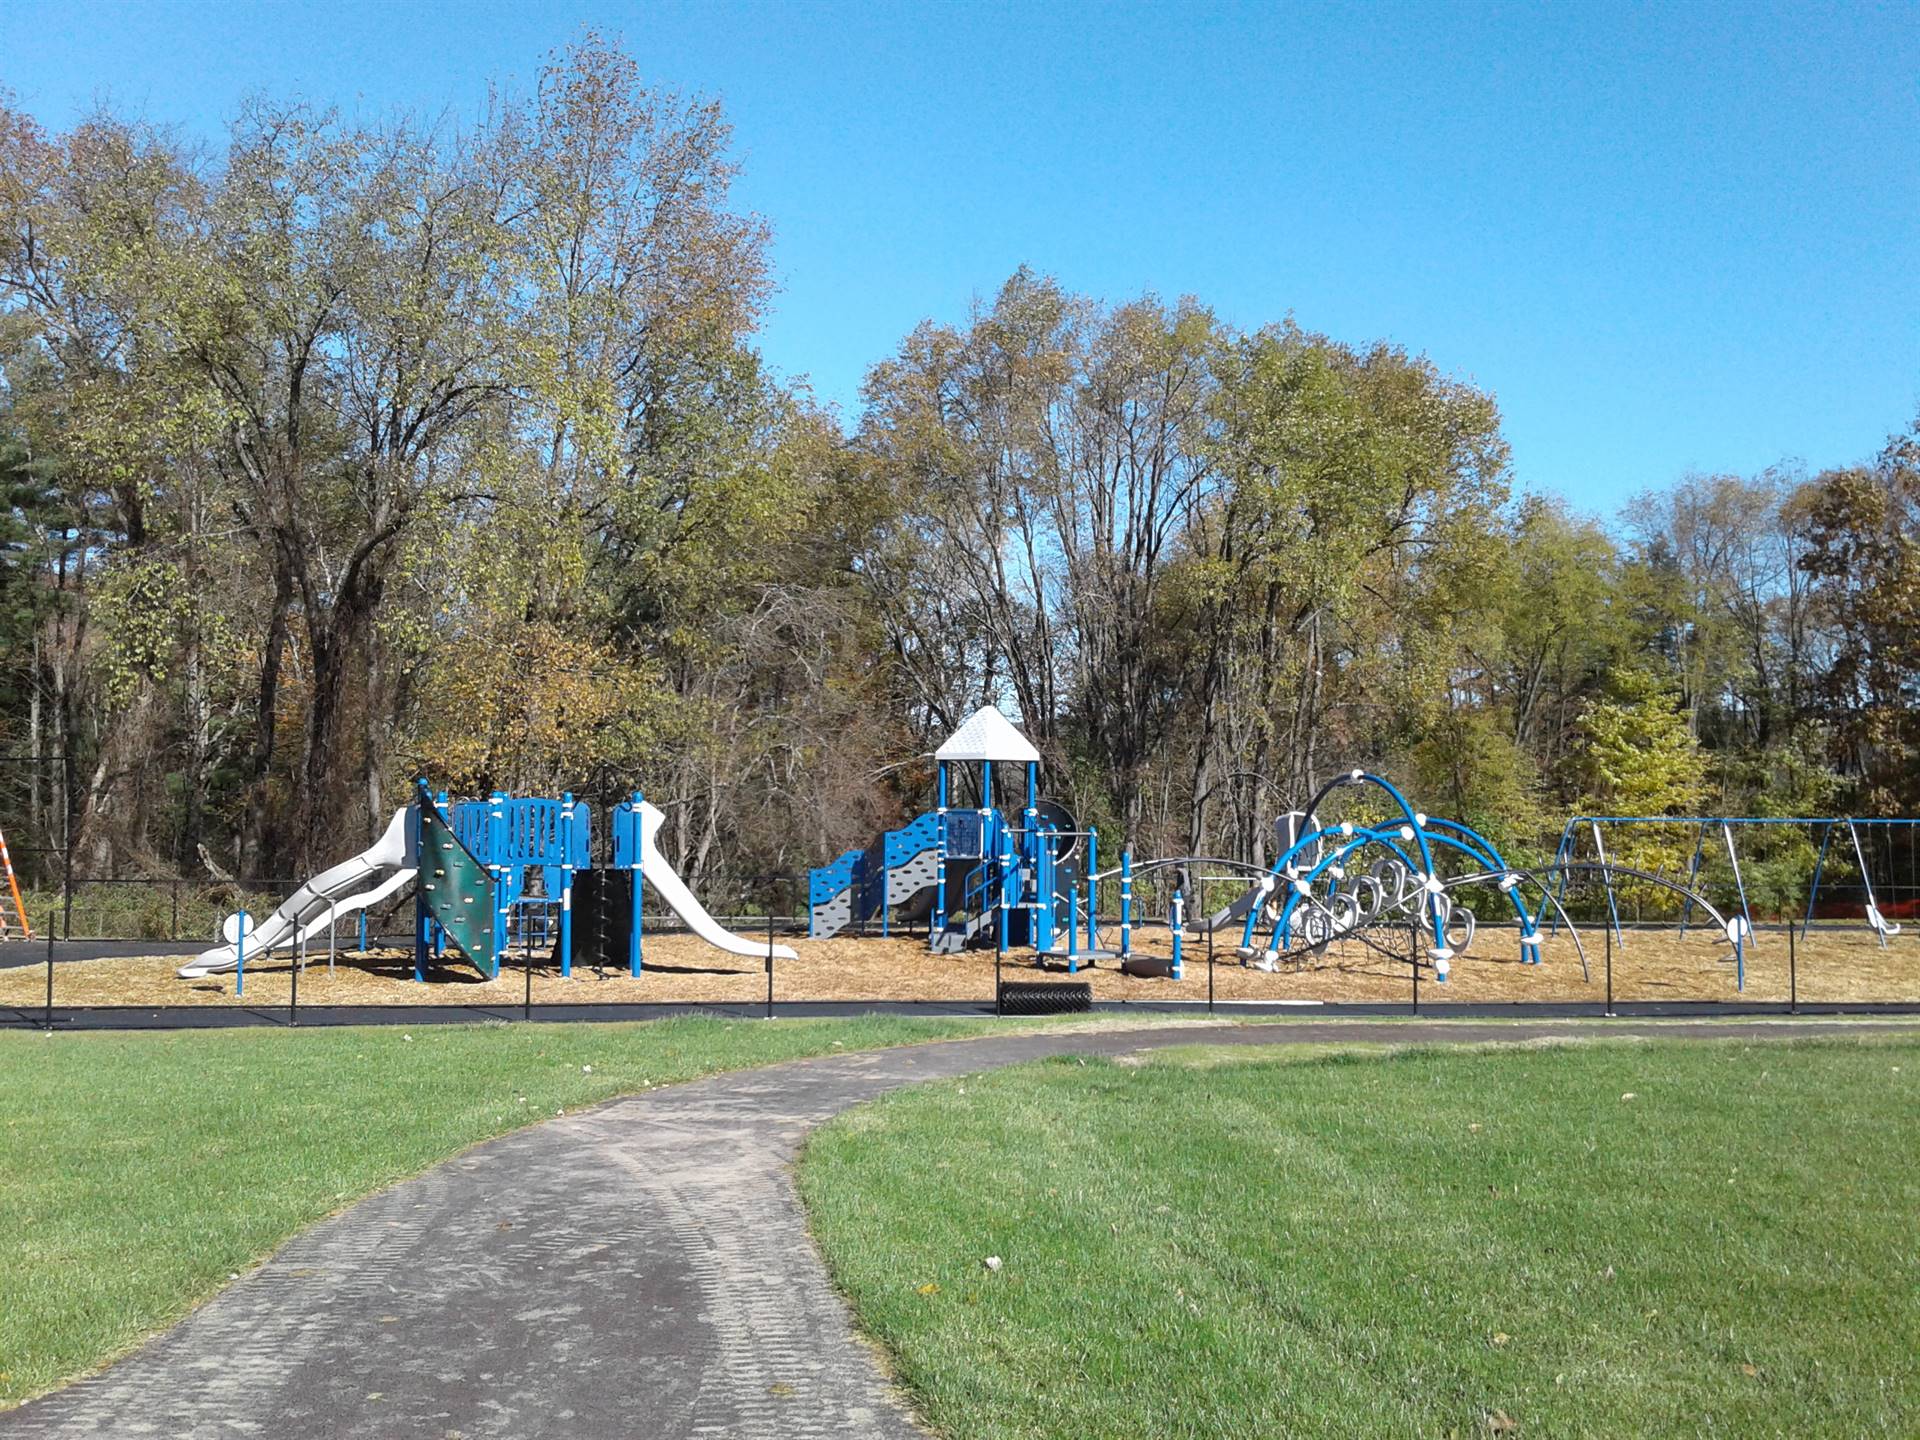 New Greenlawn Playground - view from the back of the building